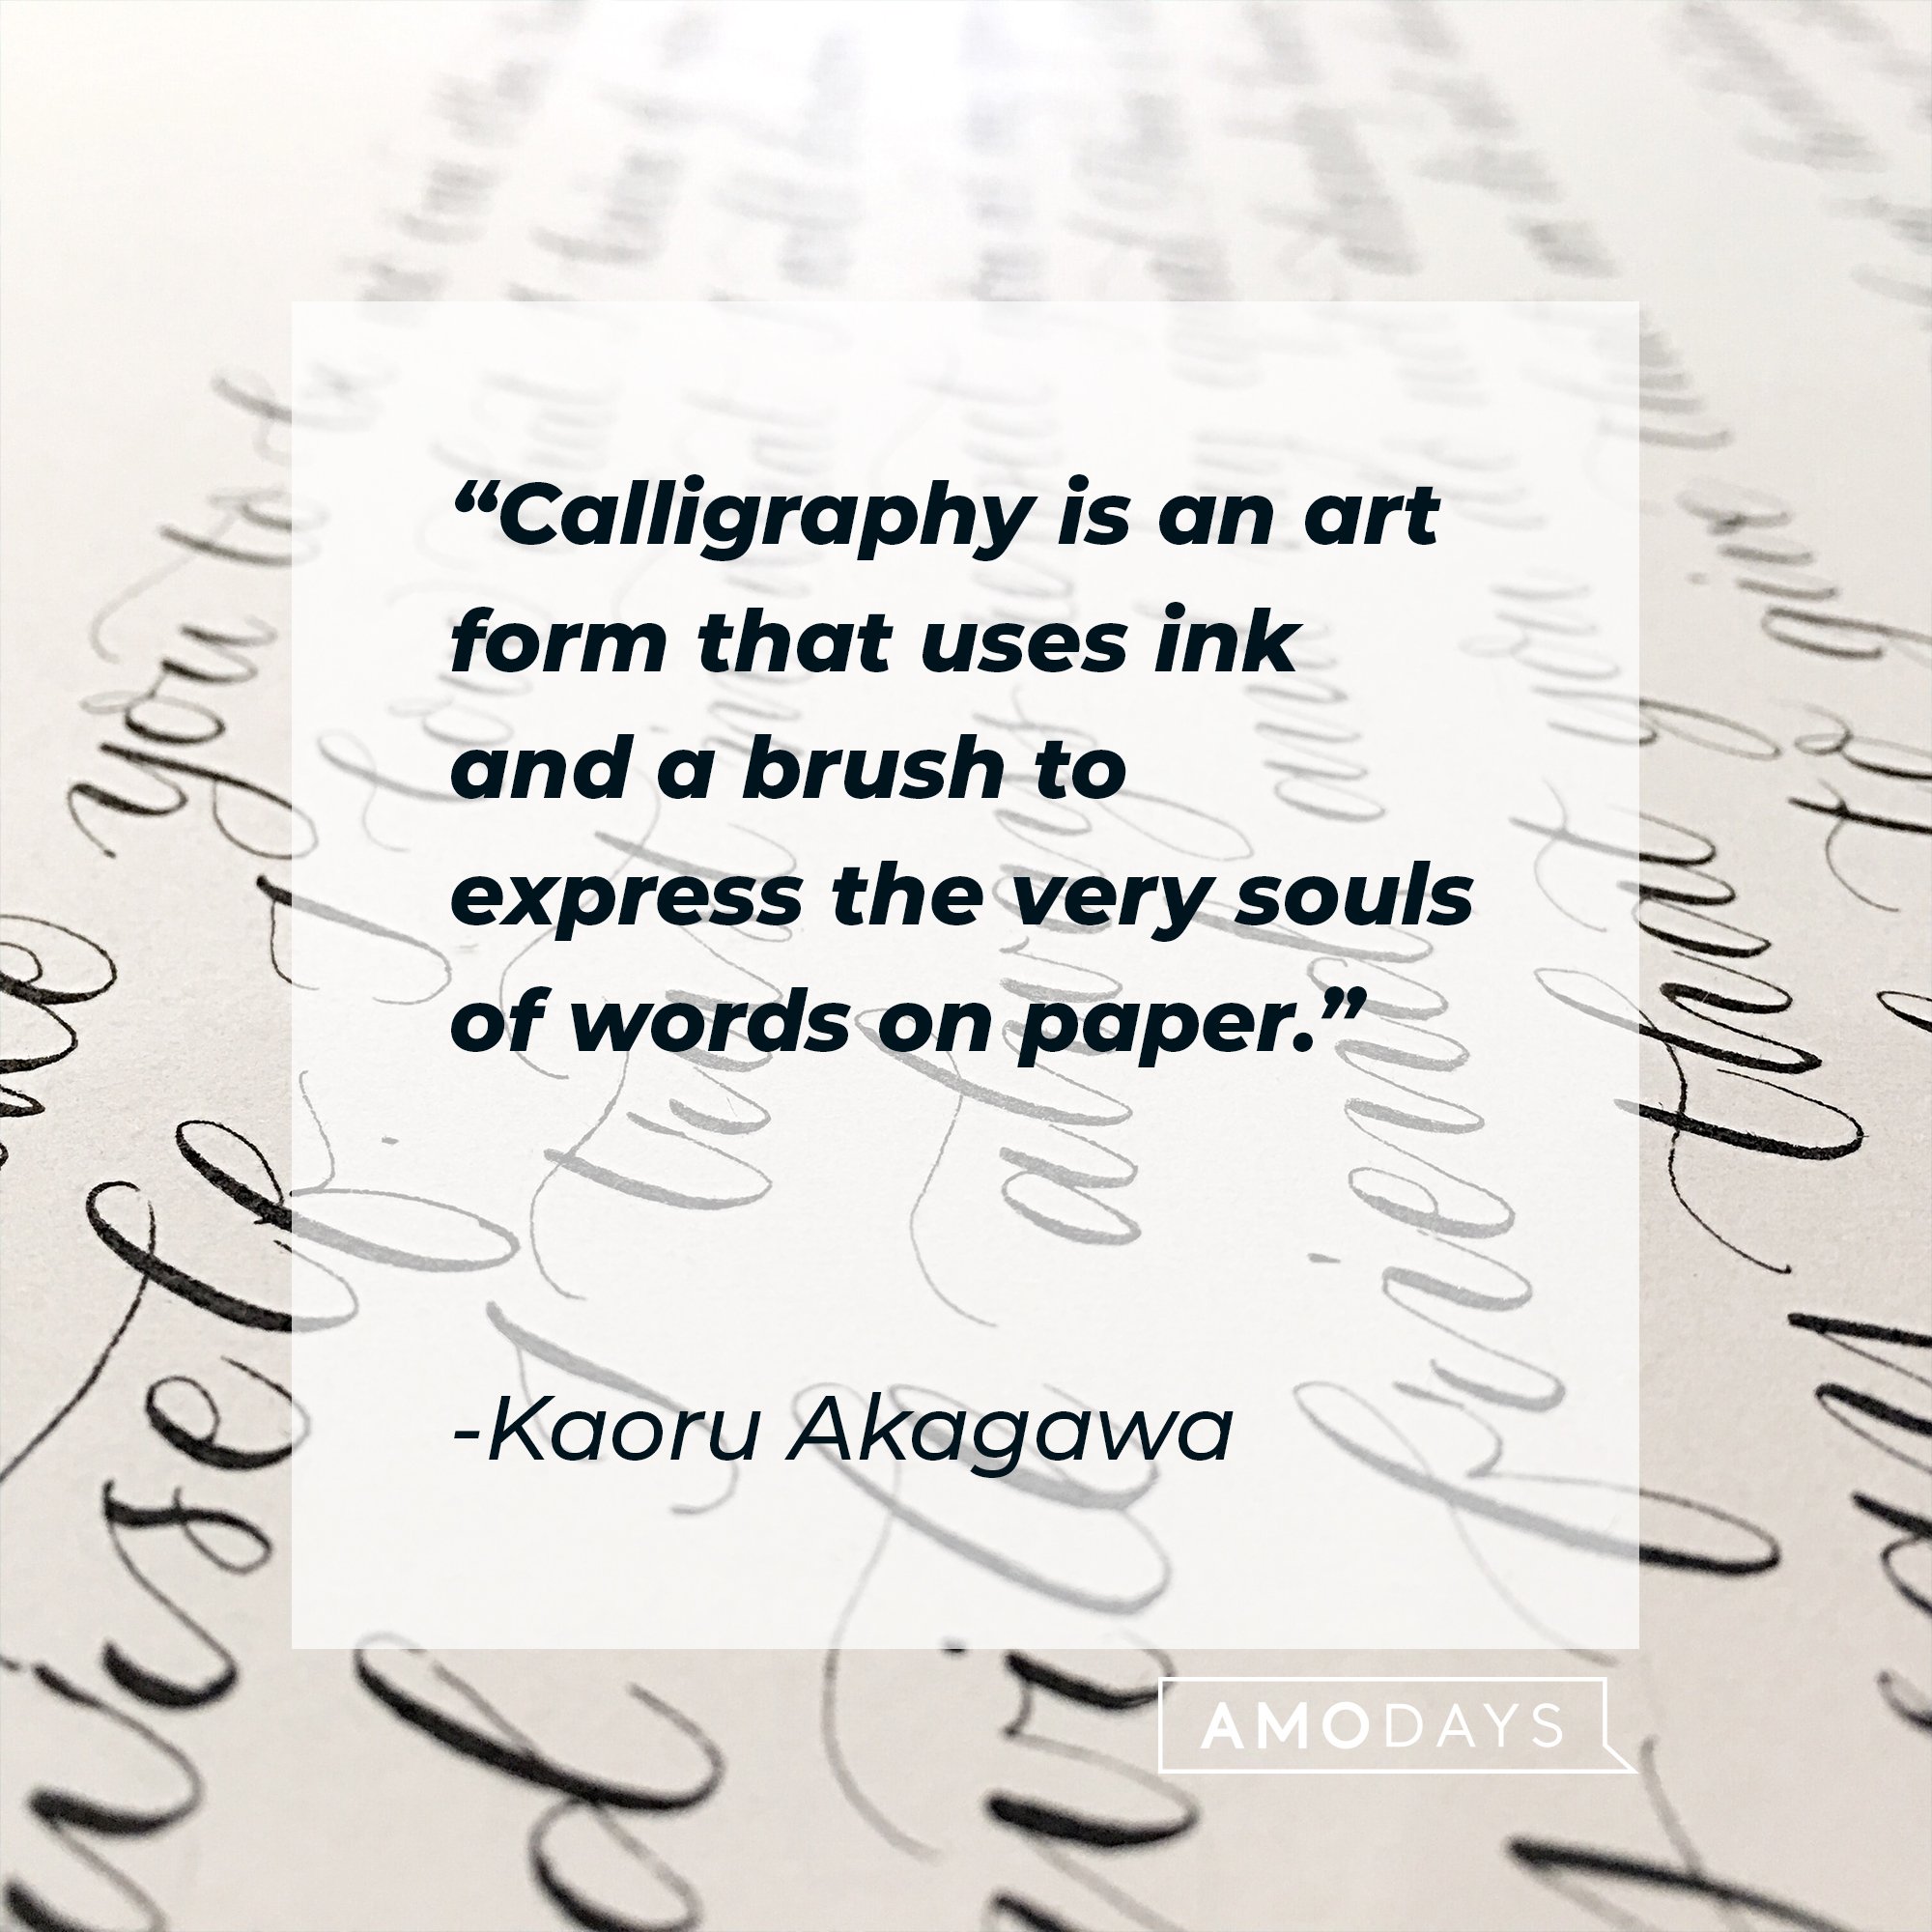 Kaoru Akagawa’s quote: "Calligraphy is an art form that uses ink and a brush to express the very souls of words on paper." | Image: AmoDays 